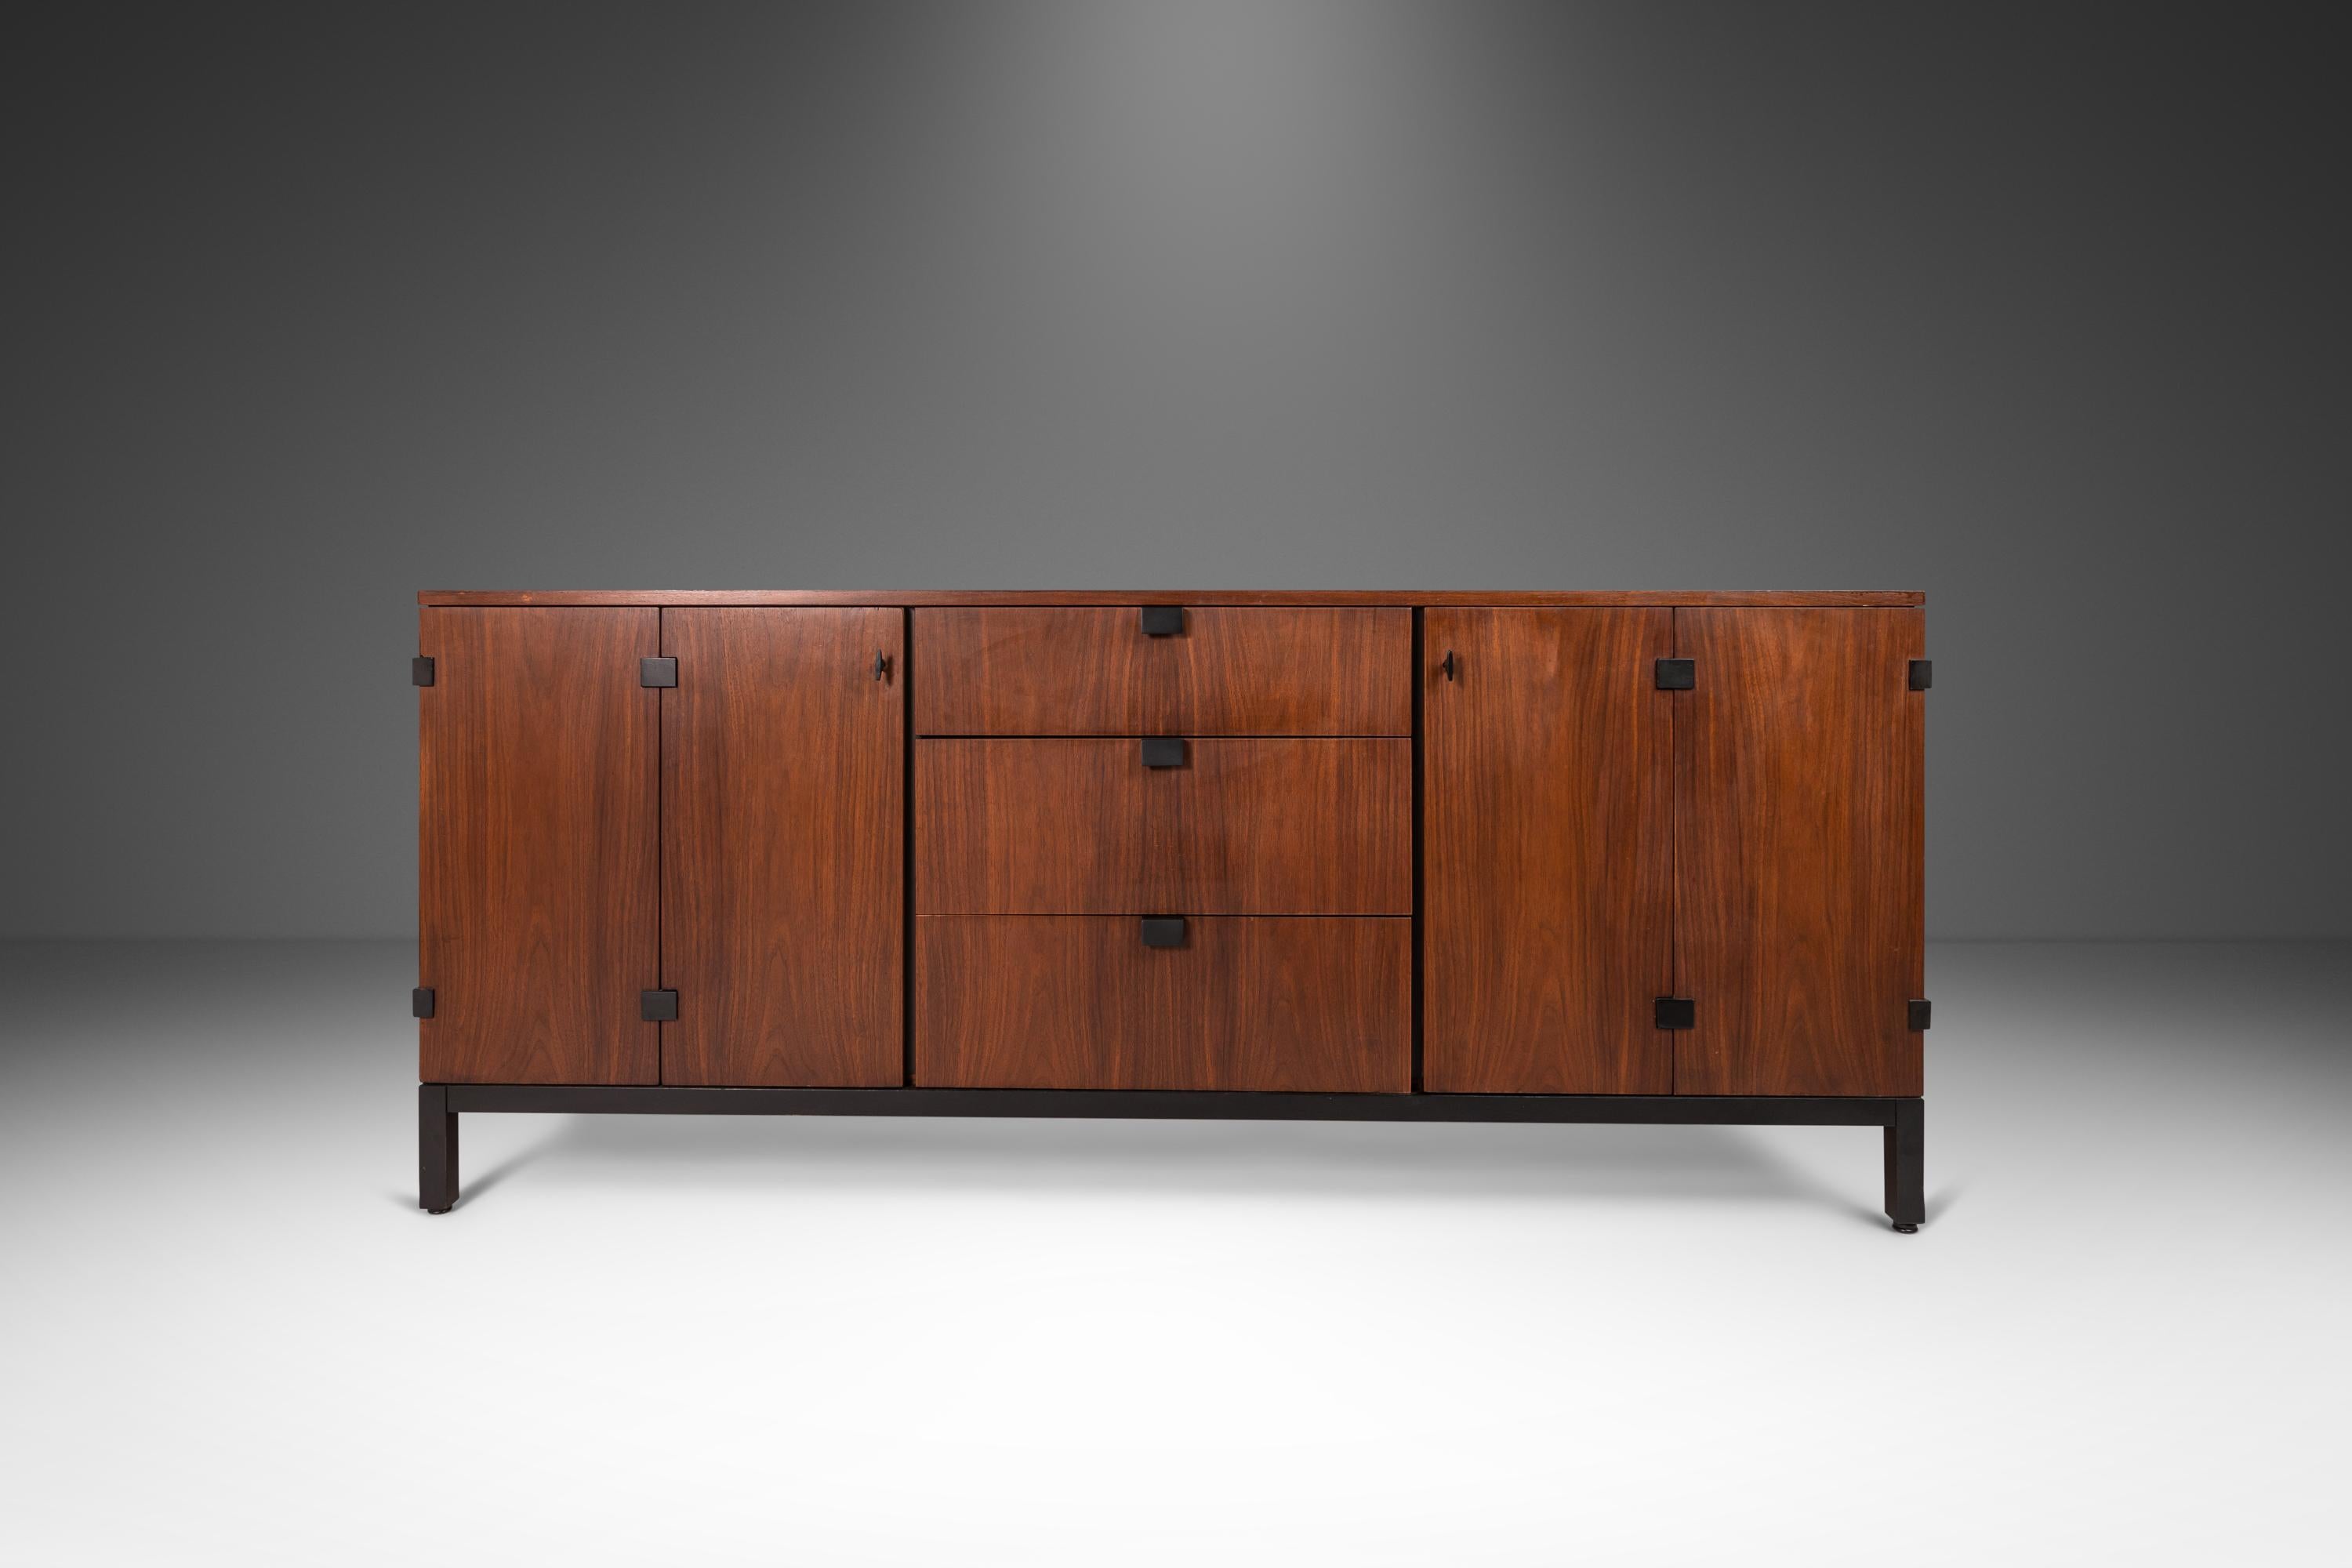 As rare as it is architecturally alluring this extraordinary nine-drawer dresser, designed by the prolific Milo Baughman for the Directional Furniture Co., is a true Mid-Century Modern gem. Constructed from a mix of solid and veneered black walnut